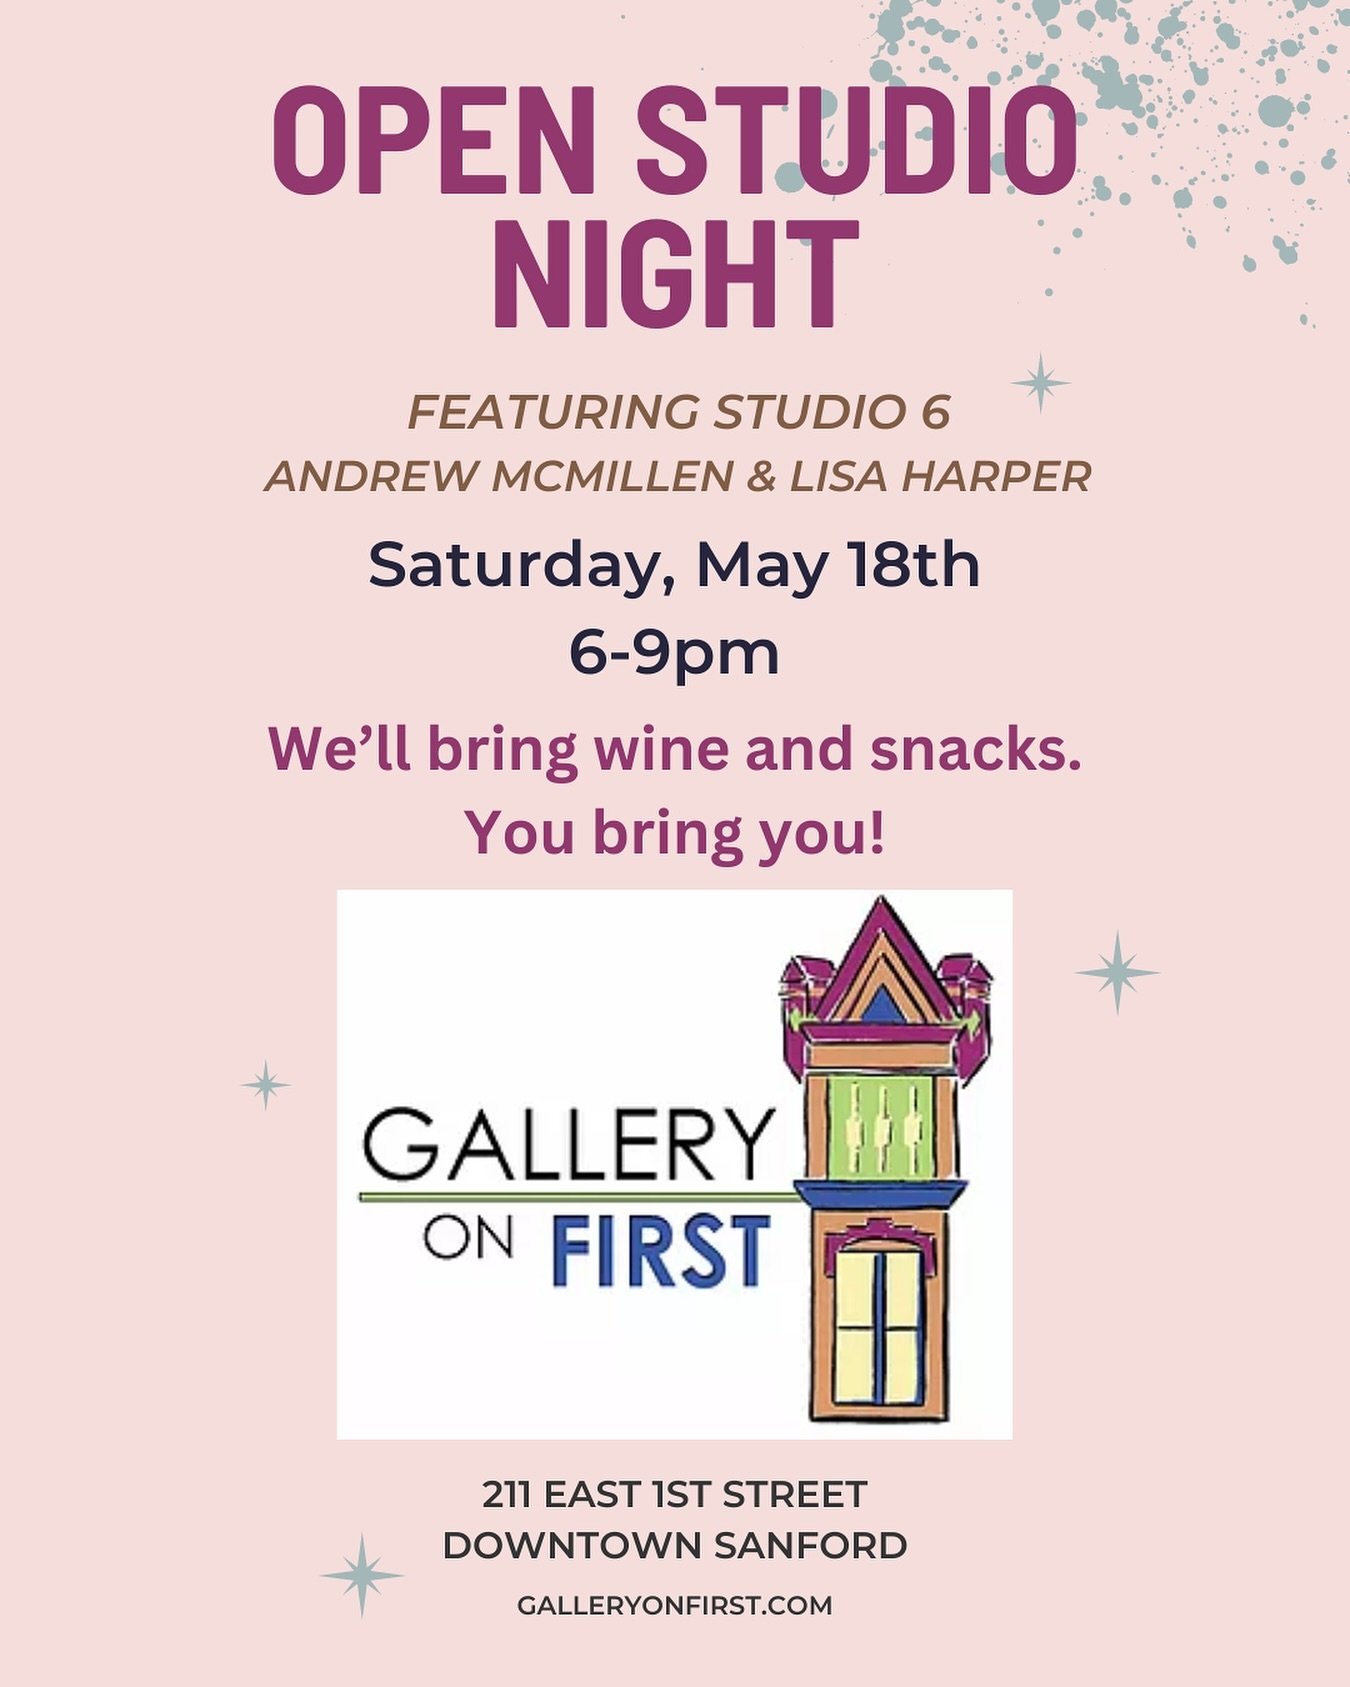 Hey, whatcha doing this Saturday night? 

If you missed the GOF Spring Show, now&rsquo;s your chance to check out my new space at @galleryonfirstsanford&rsquo;s Open Studio Night! 

Studio 6 is featured this month AKA me + @am.musing. We&rsquo;ll be 